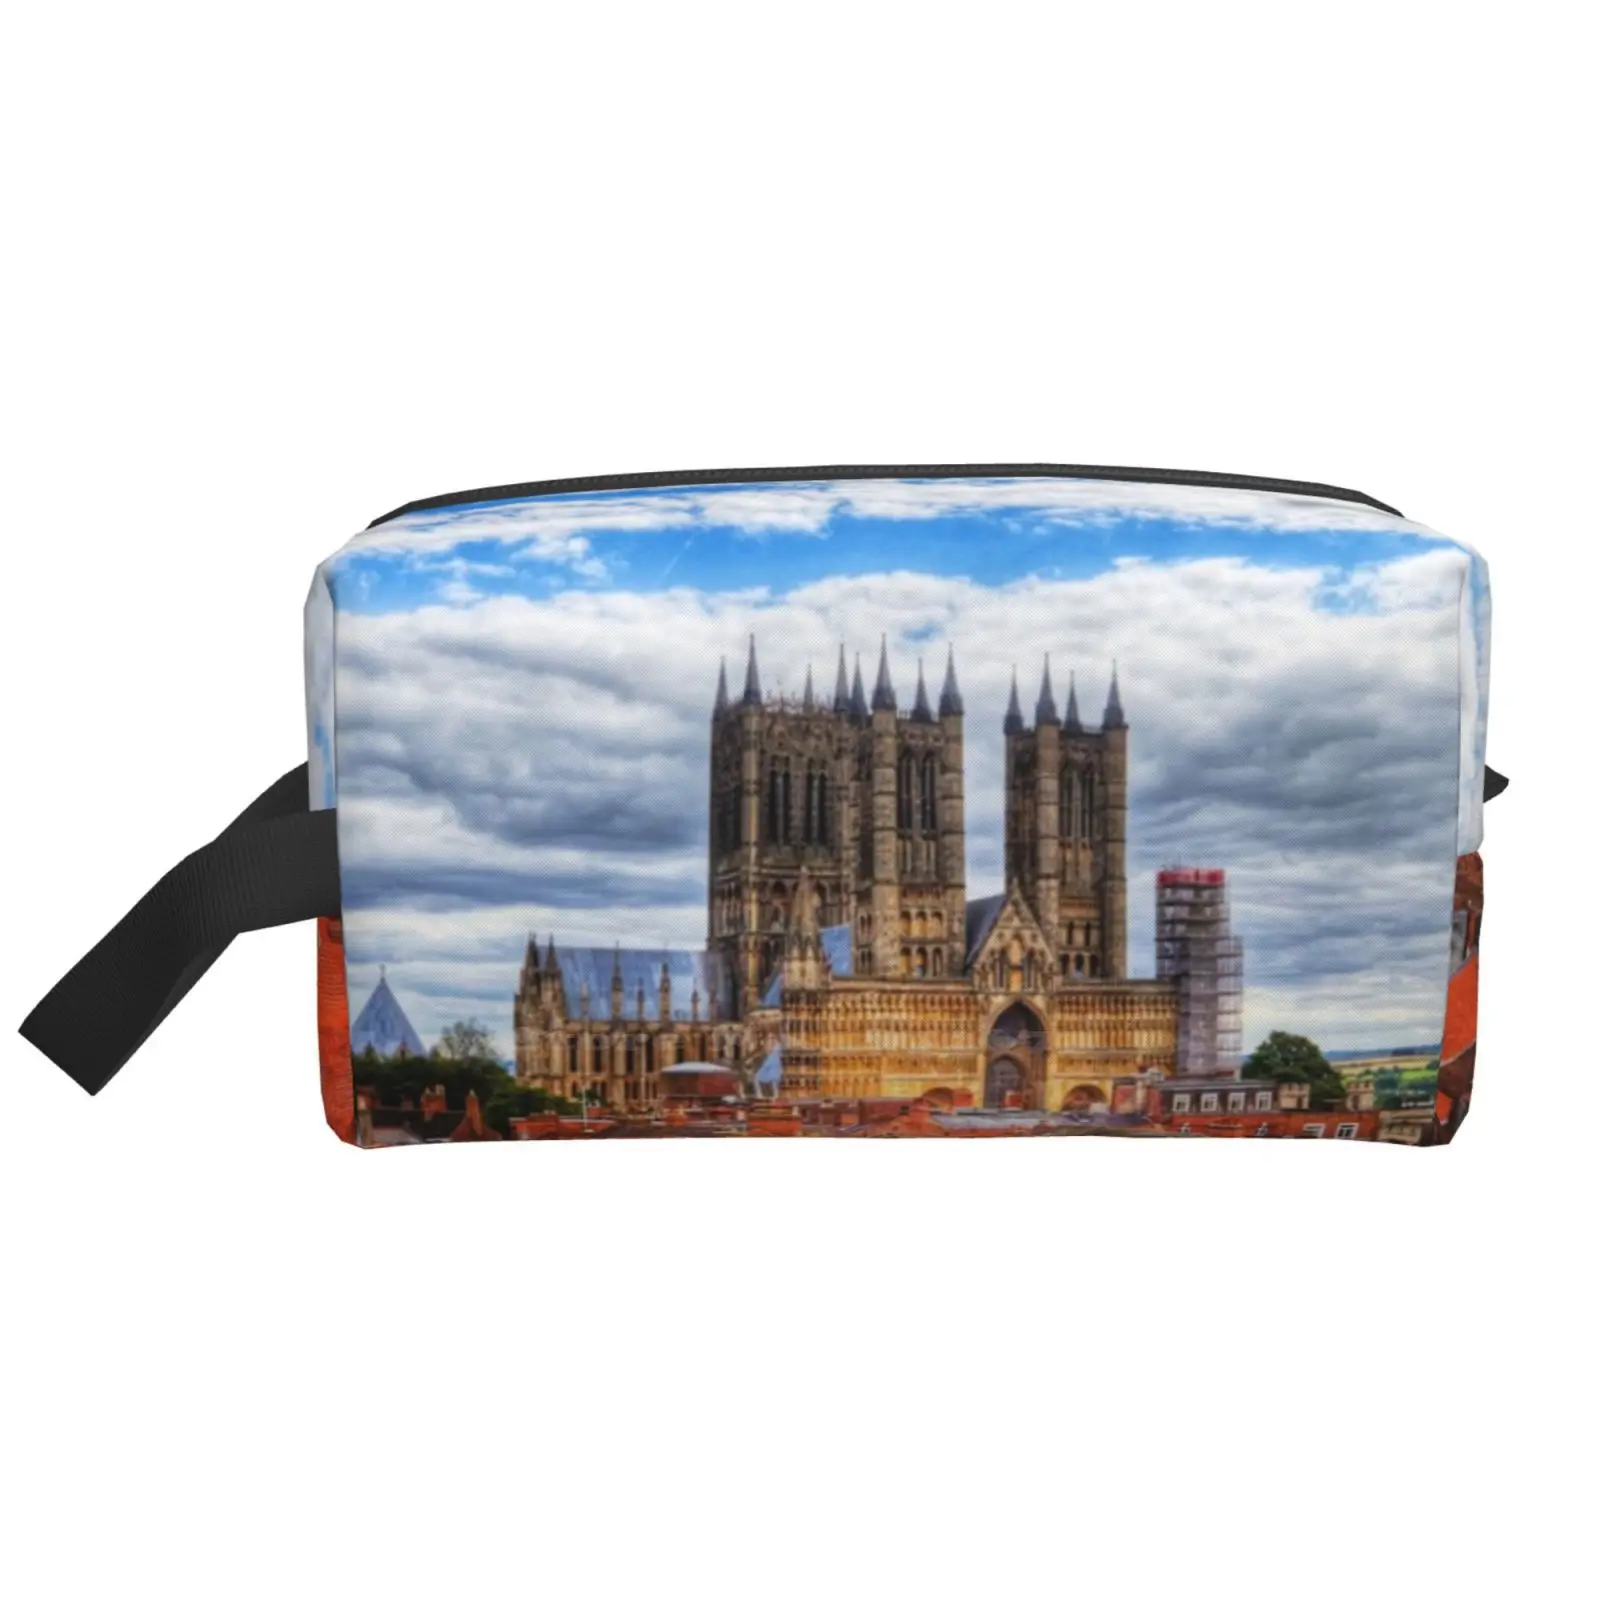 Lincoln Cathedral Landscape Bathroom Storge Bag Data Cable Pen Makeup Bags Lincoln Cathedral City Dramatic Drama Clouds Cloudy